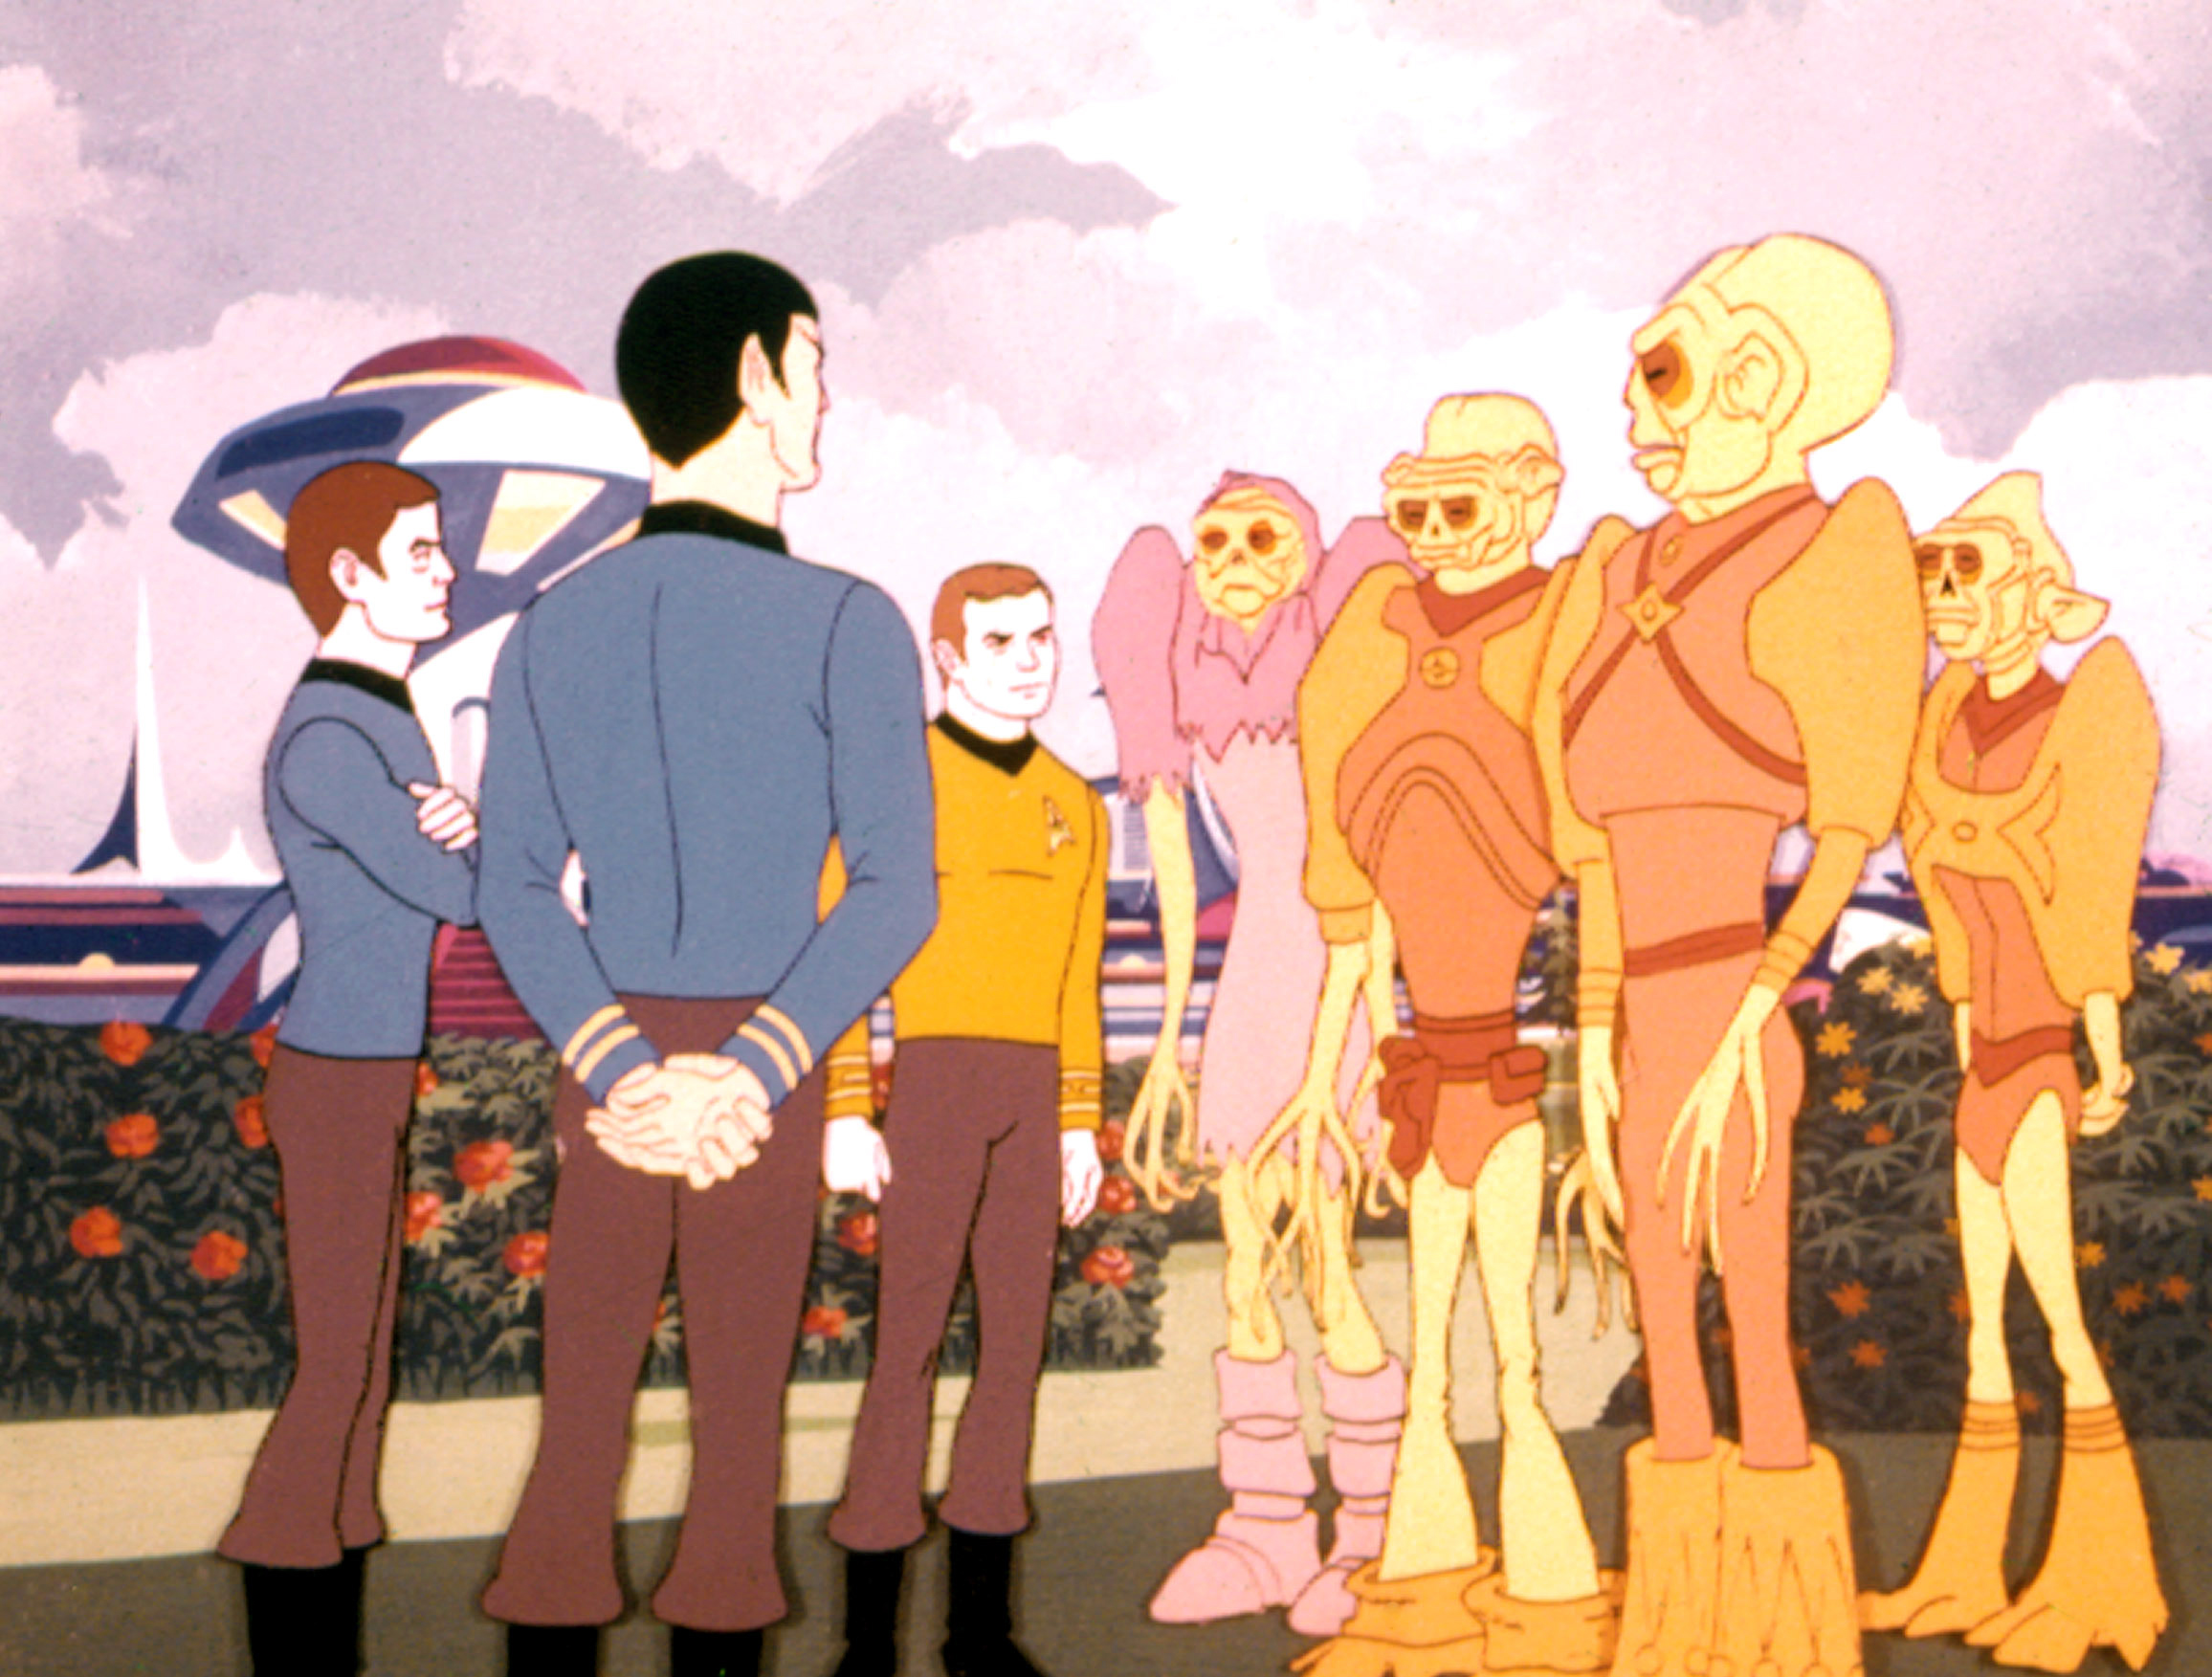 image from the 1973-74 show "Star Trek: The Animated Series." It depicts animated versions of Captain Kirk, Spock and Dr. McCoy meeting with a group of aliens.